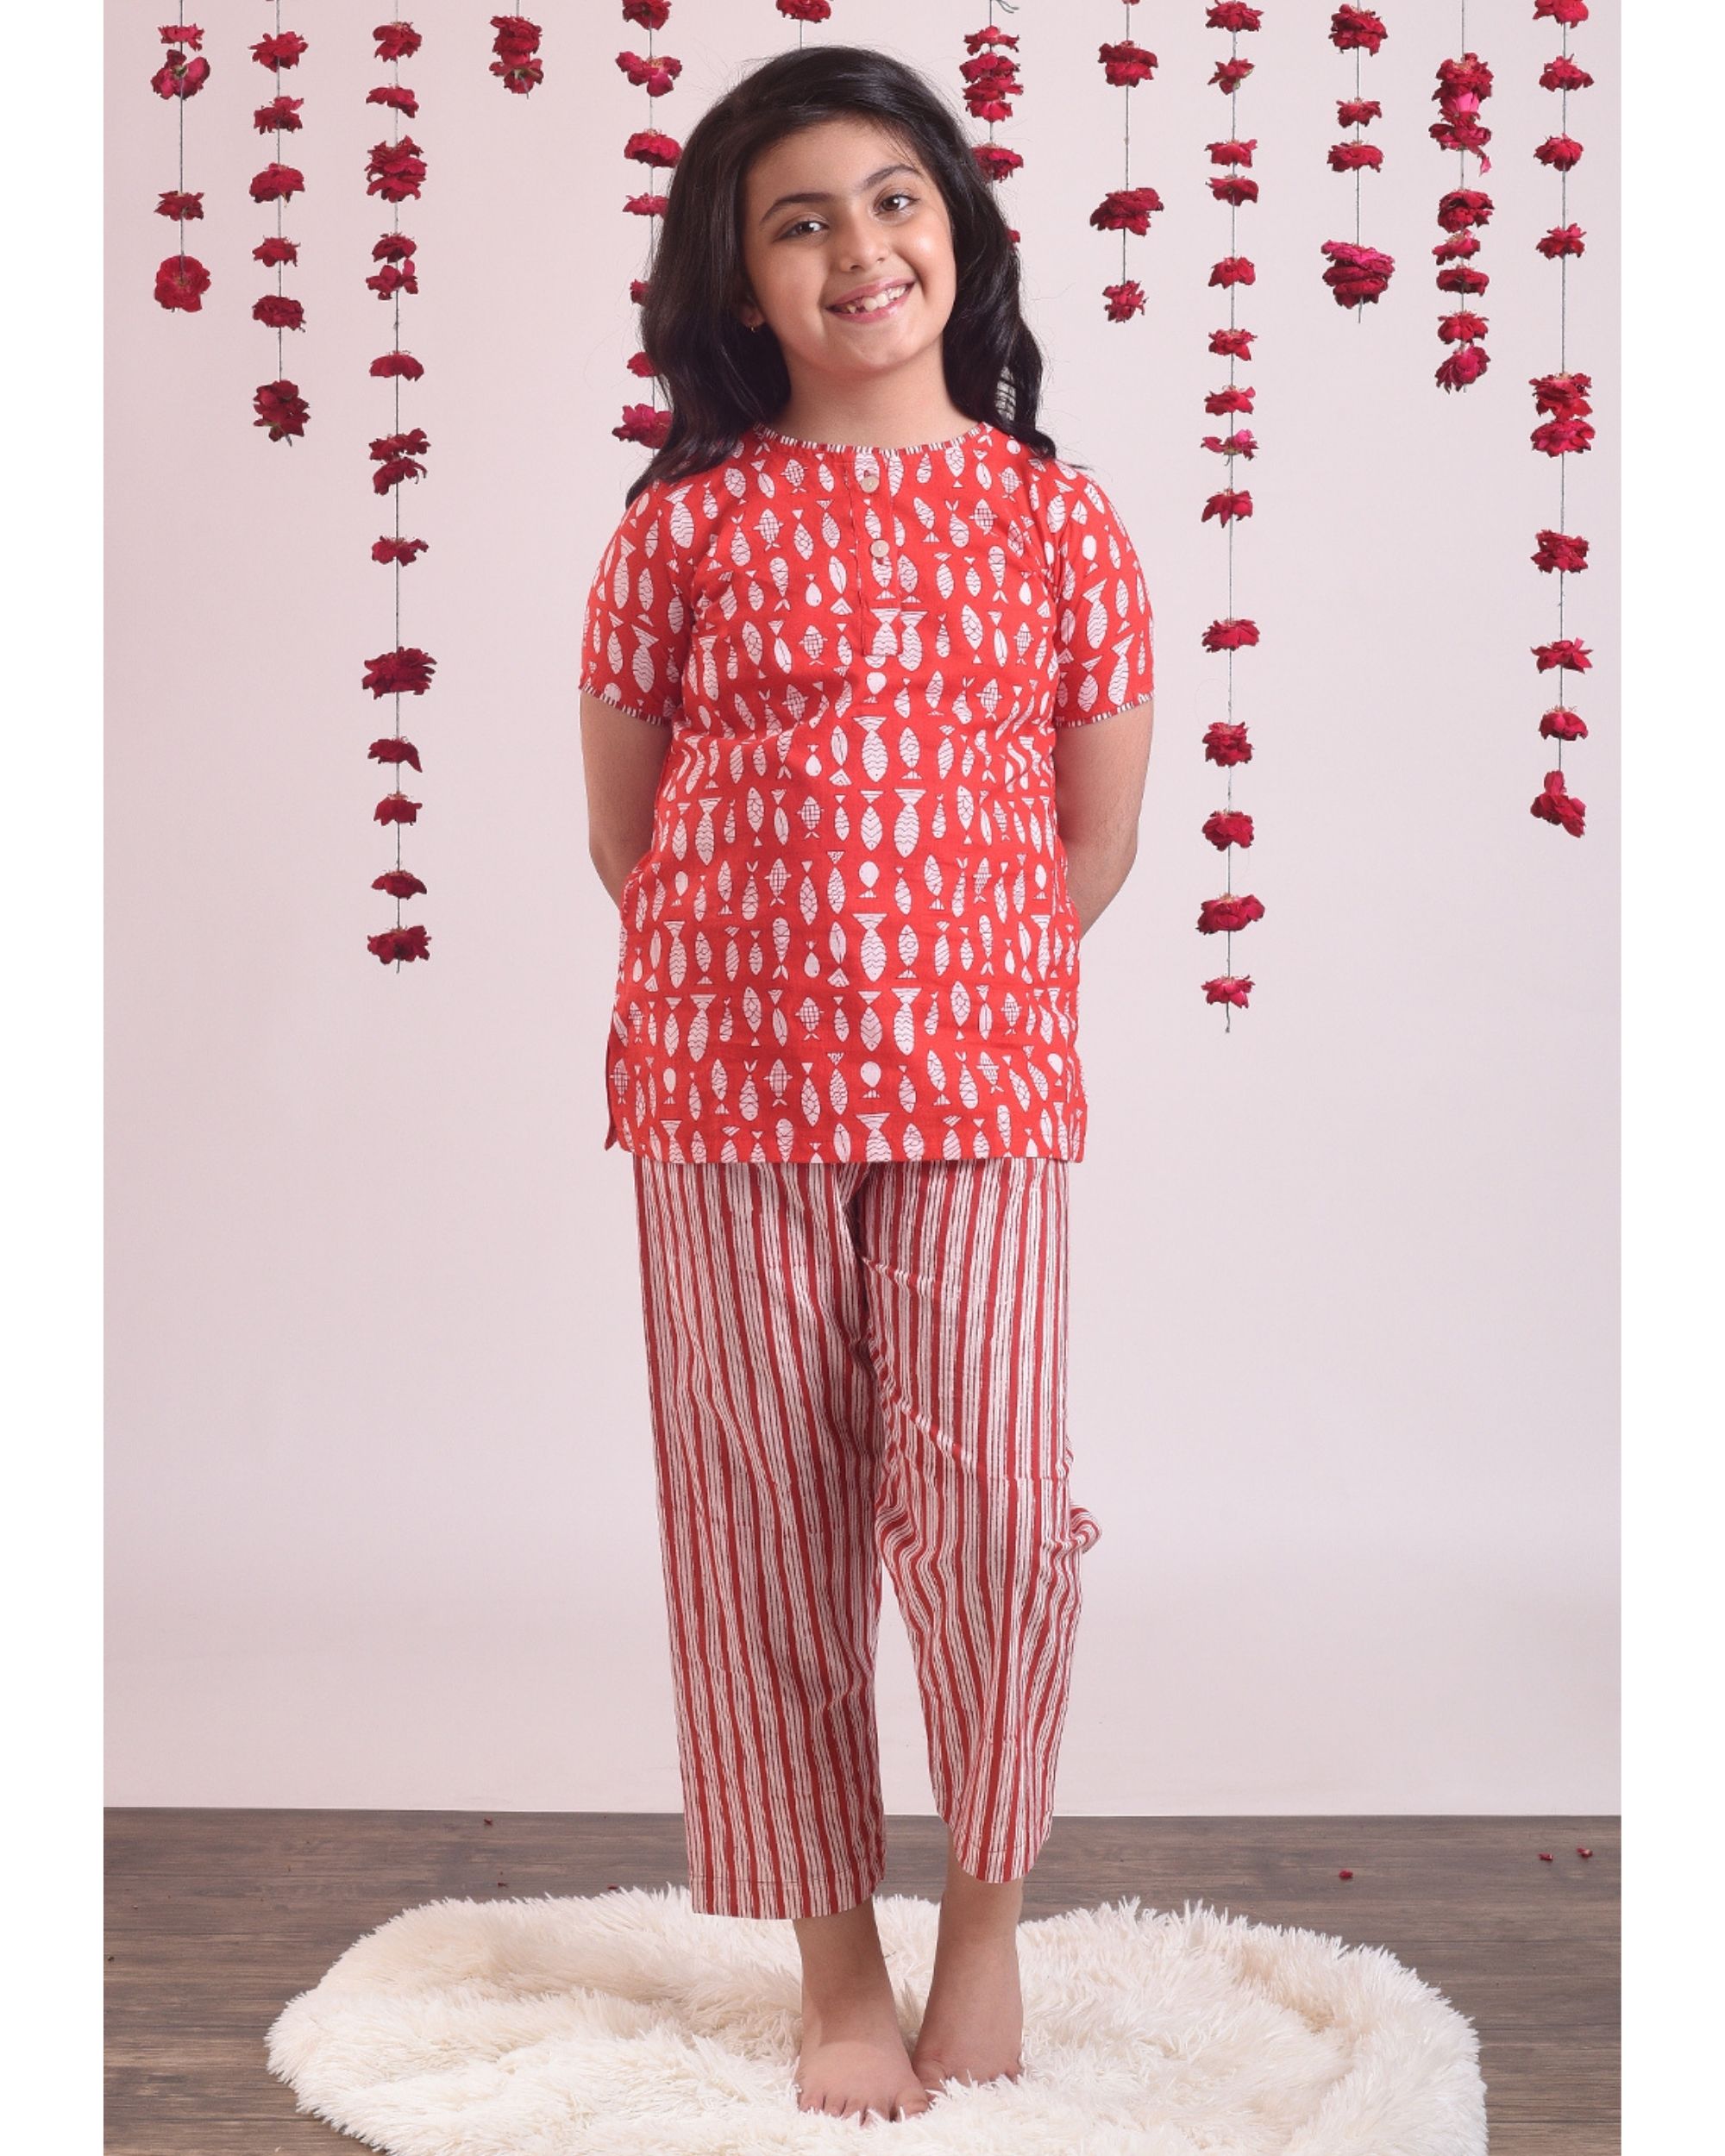 Red fish printed top with striped pants - set of two